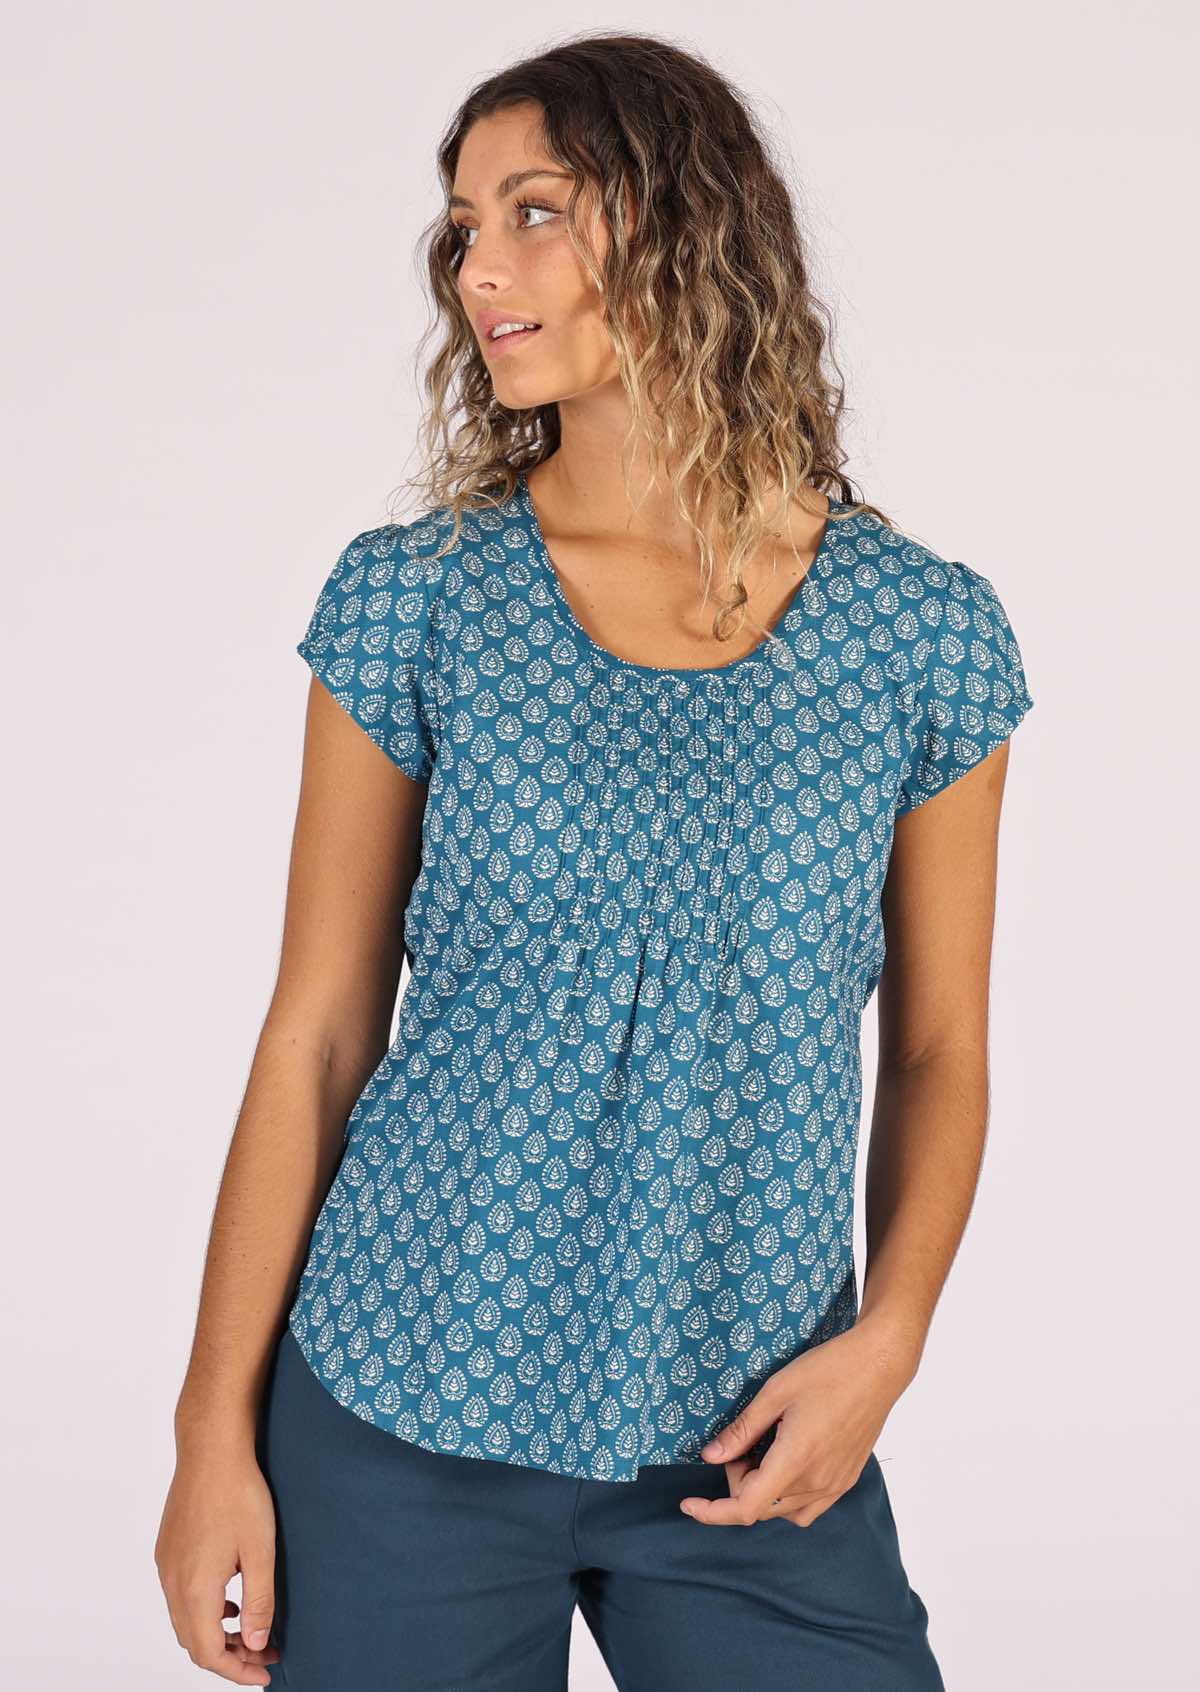 Model wears white on blue printed cotton top with cap sleeves and a low round neckline